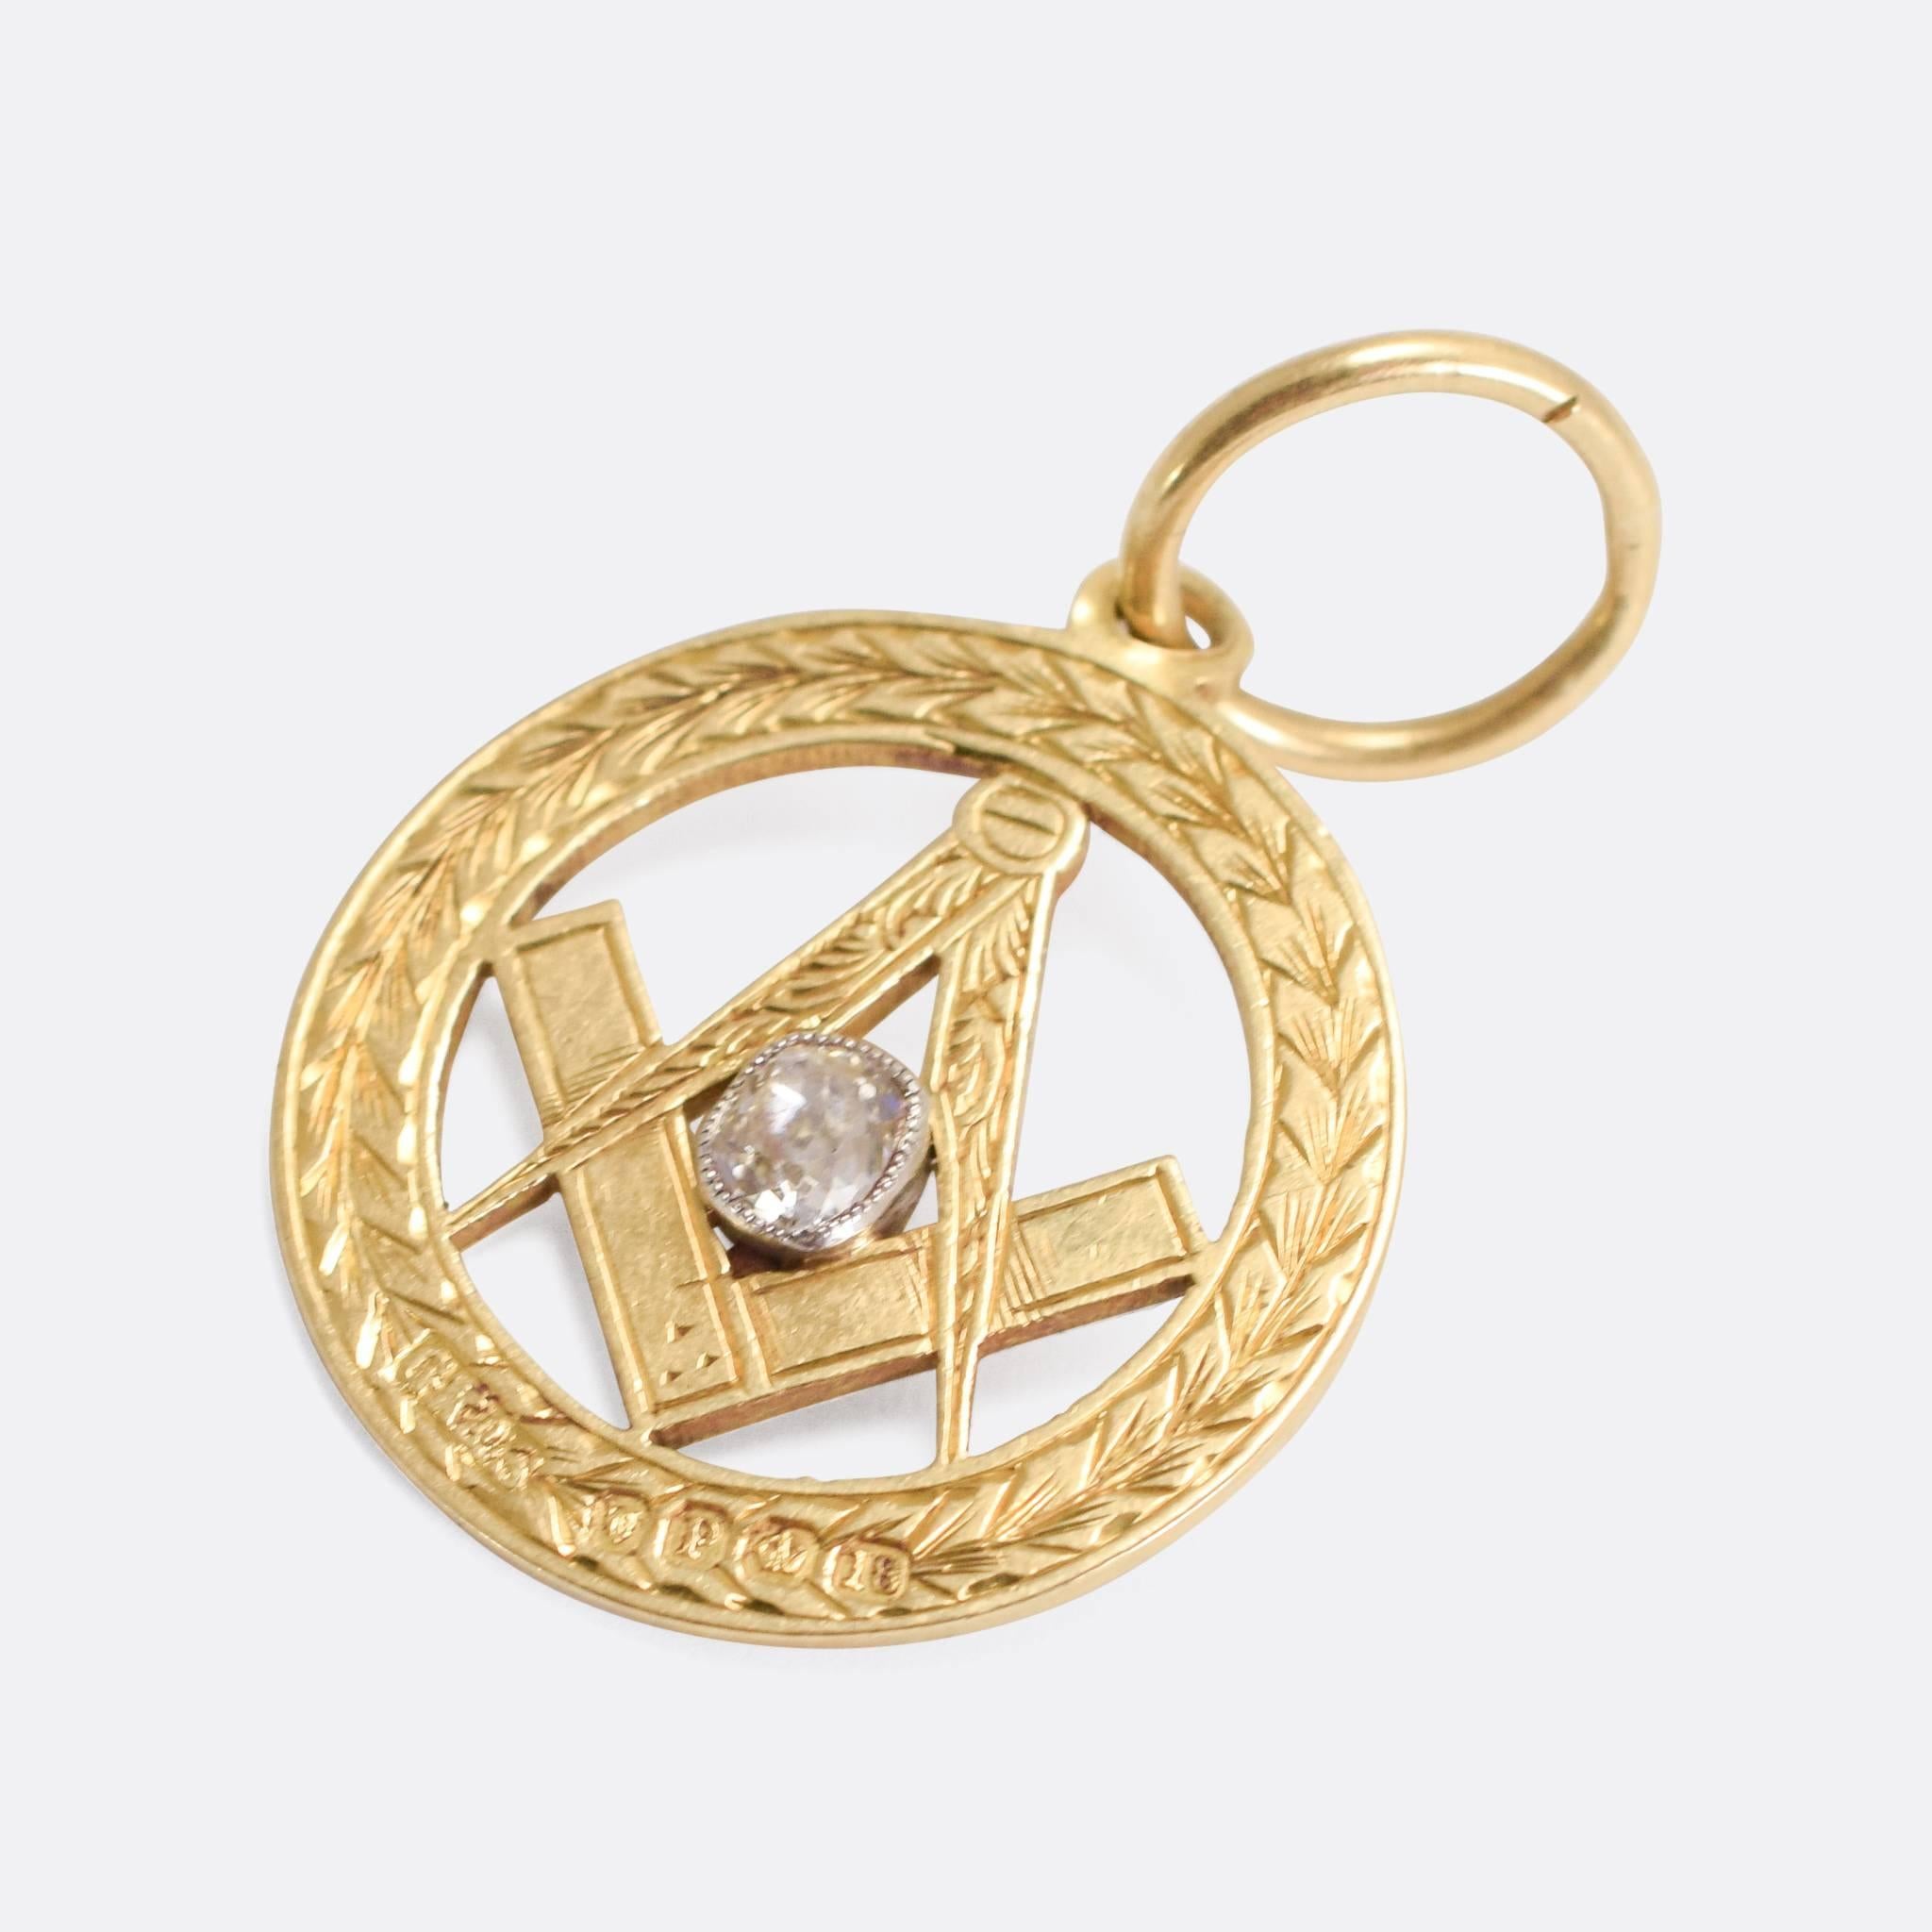 The Masonic Square & Compasses, the centrepiece to this exquisite antique pendant, are perhaps the most recognisable of the many symbols used by the Freemasons. The border has been engraved with a barley twist motif, another symbol pertinent to